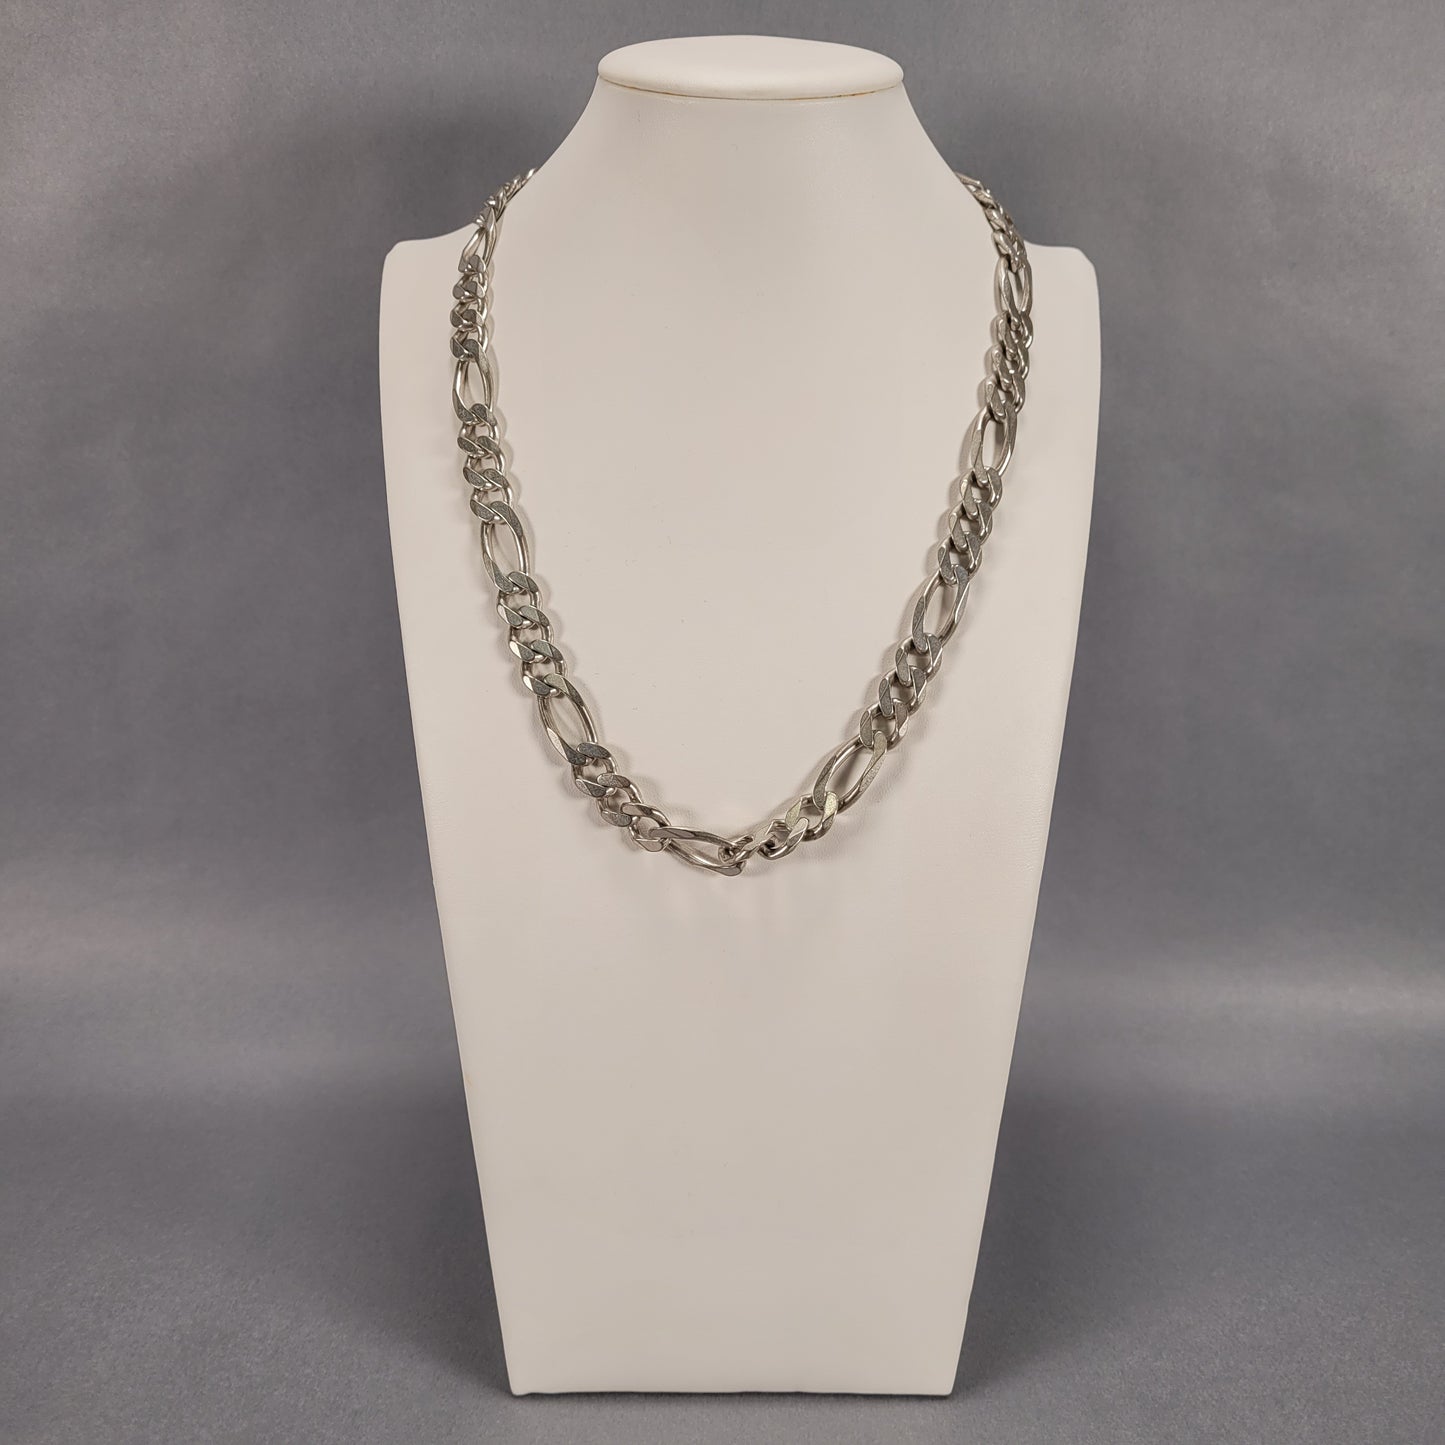 22" Sterling Silver Figaro Link Chain 94.3g